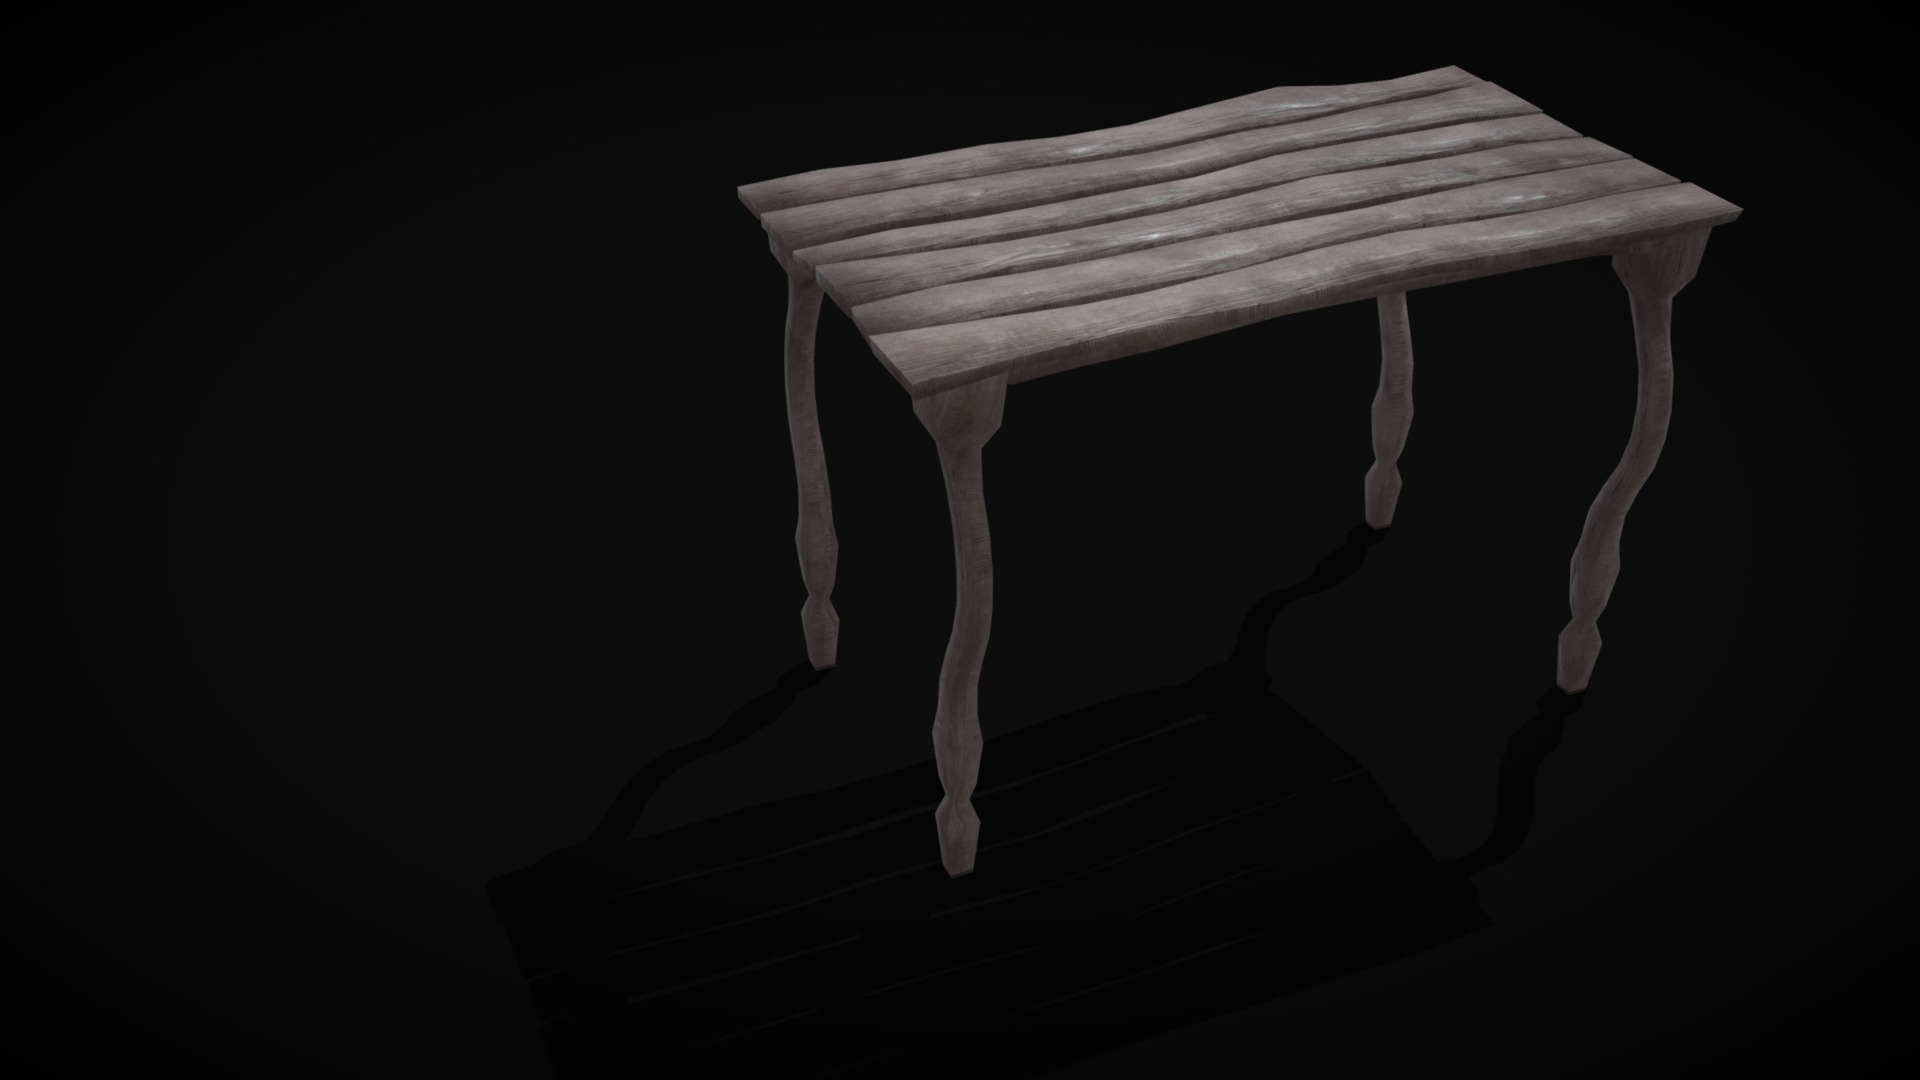 3D model Rustic wood table - This is a 3D model of the Rustic wood table. The 3D model is about a wooden table with a white top.